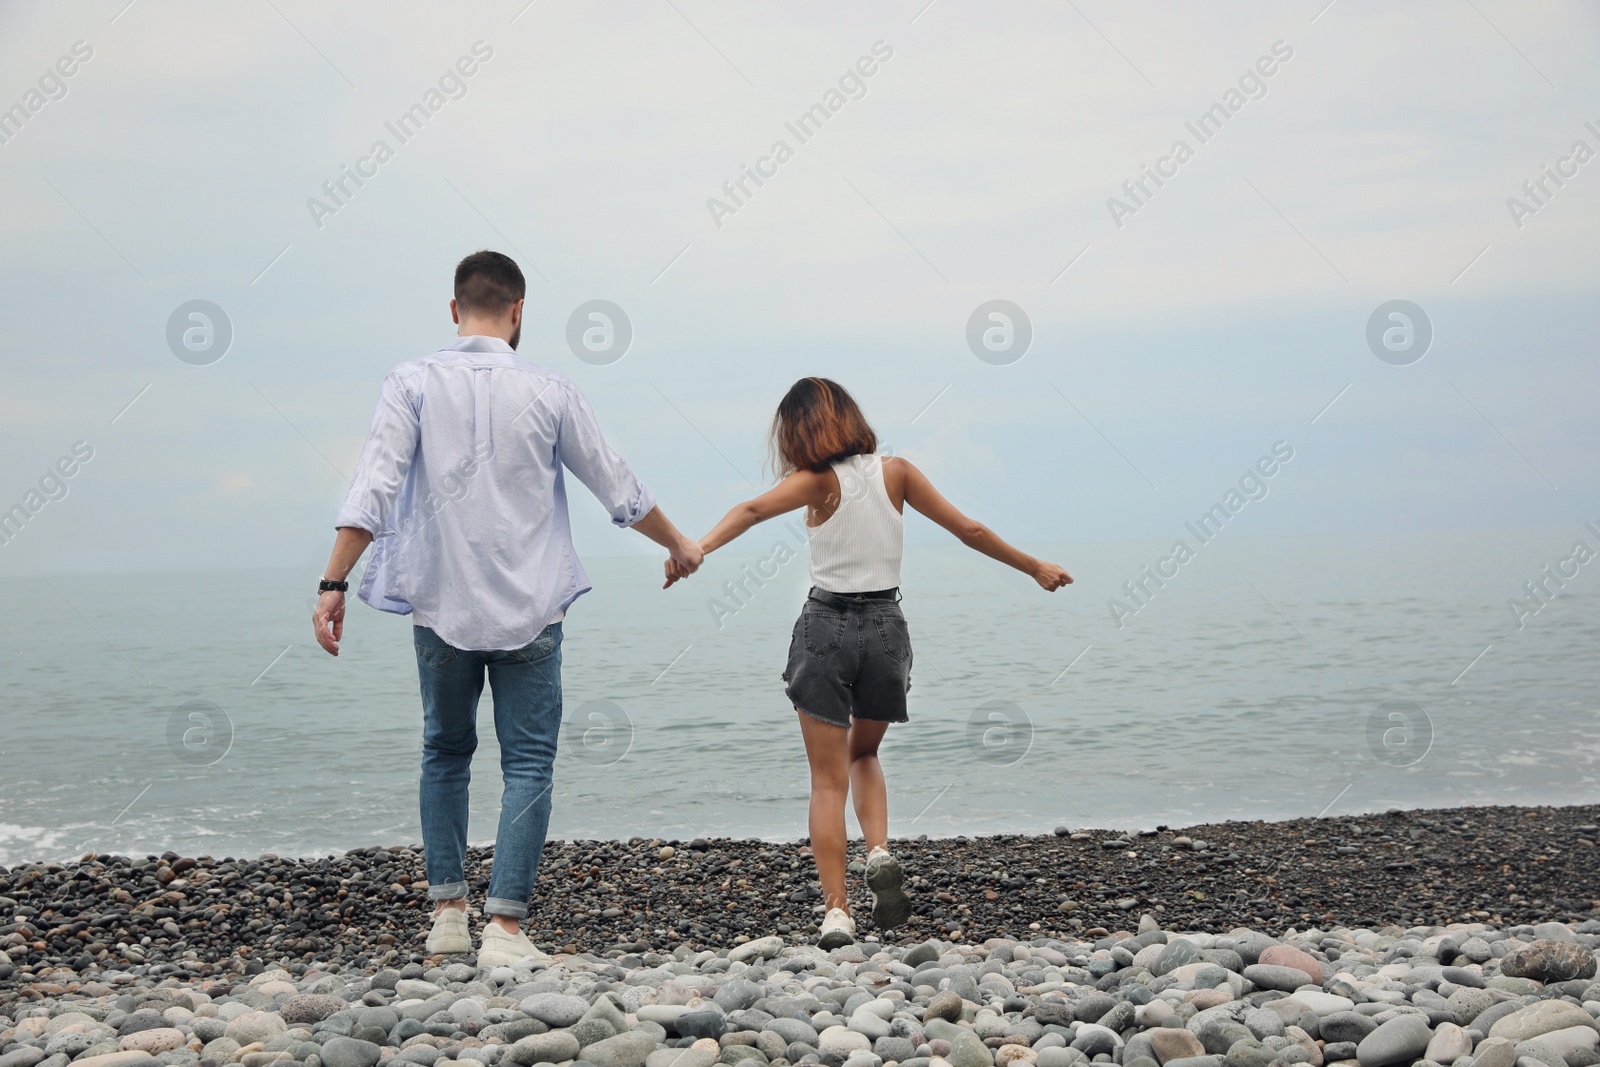 Photo of Young couple on rocky beach near sea, back view